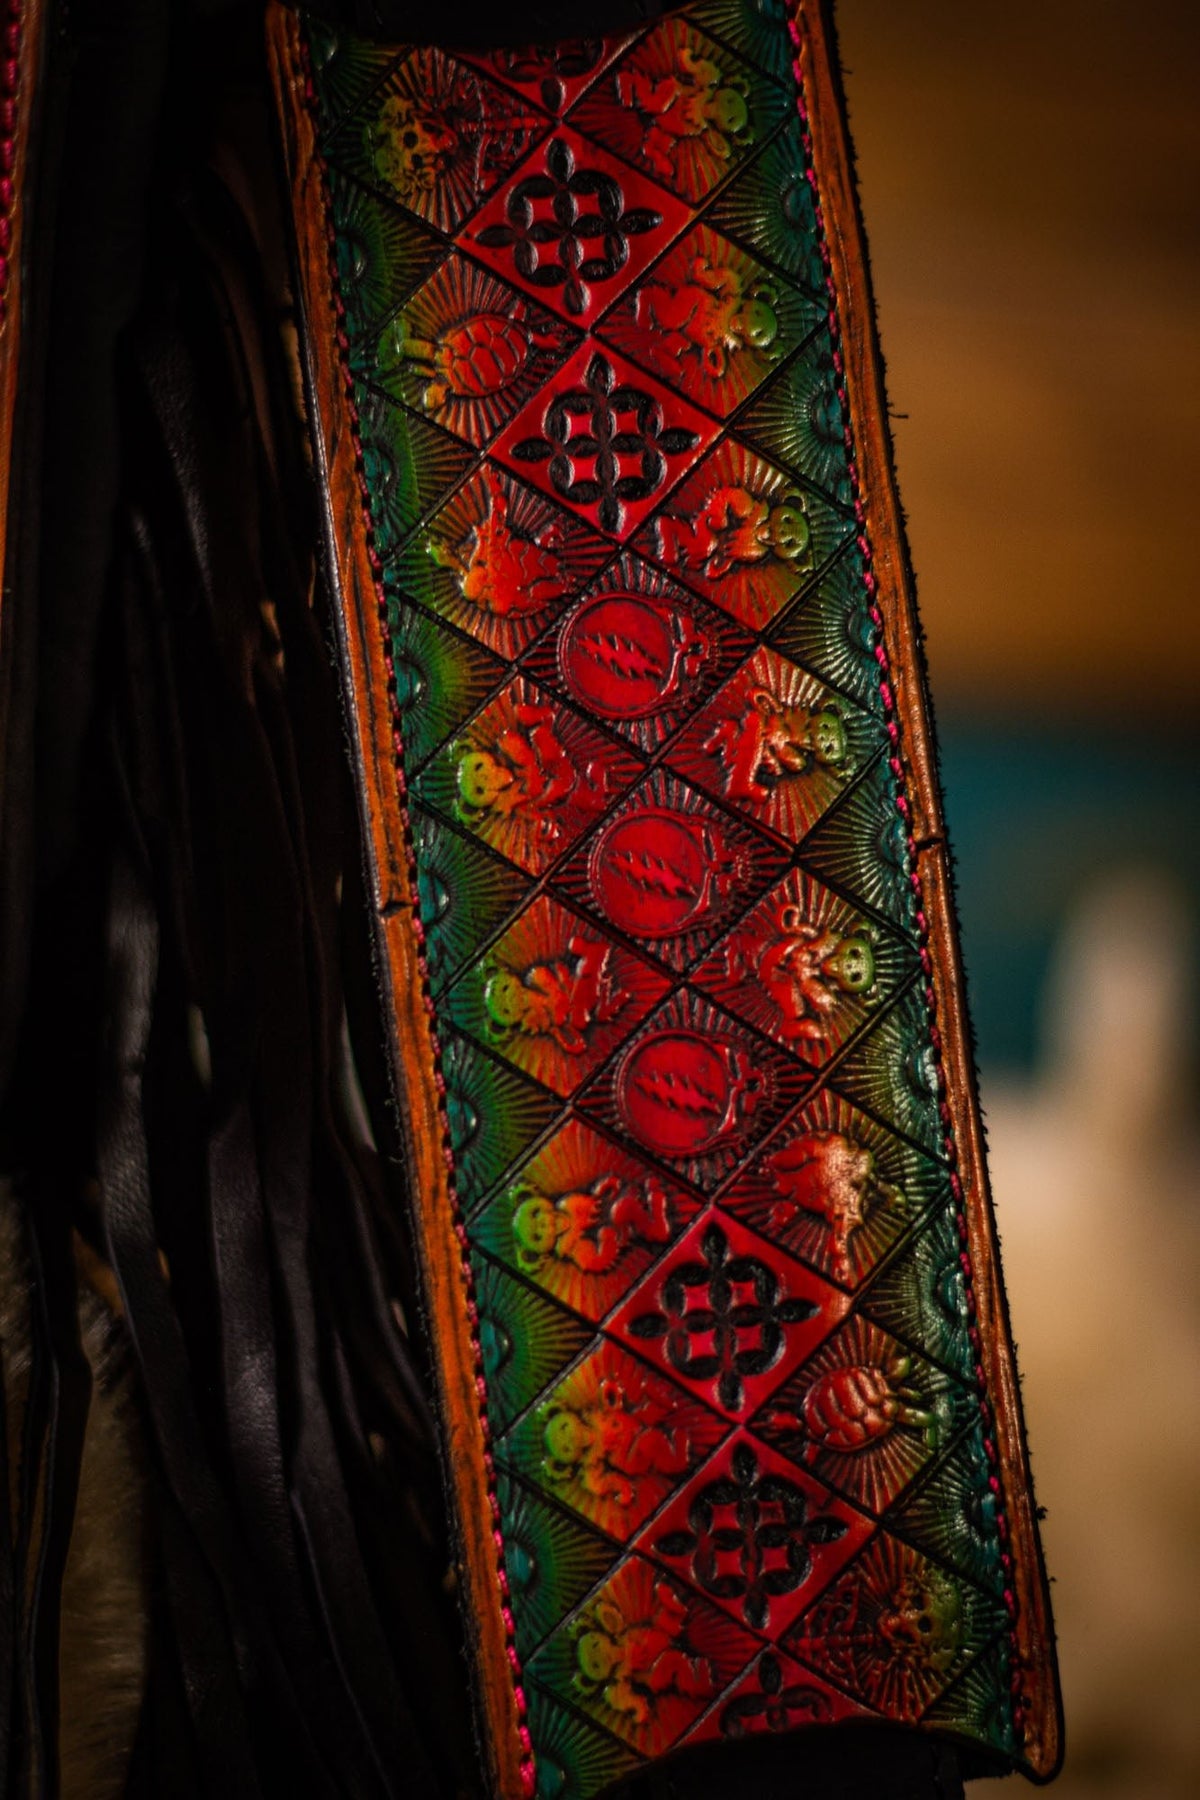 Rainbow - Dead Themed - Tooled Leather Fringe Crossbody Bag - Lotus Leather Brown with Fringe